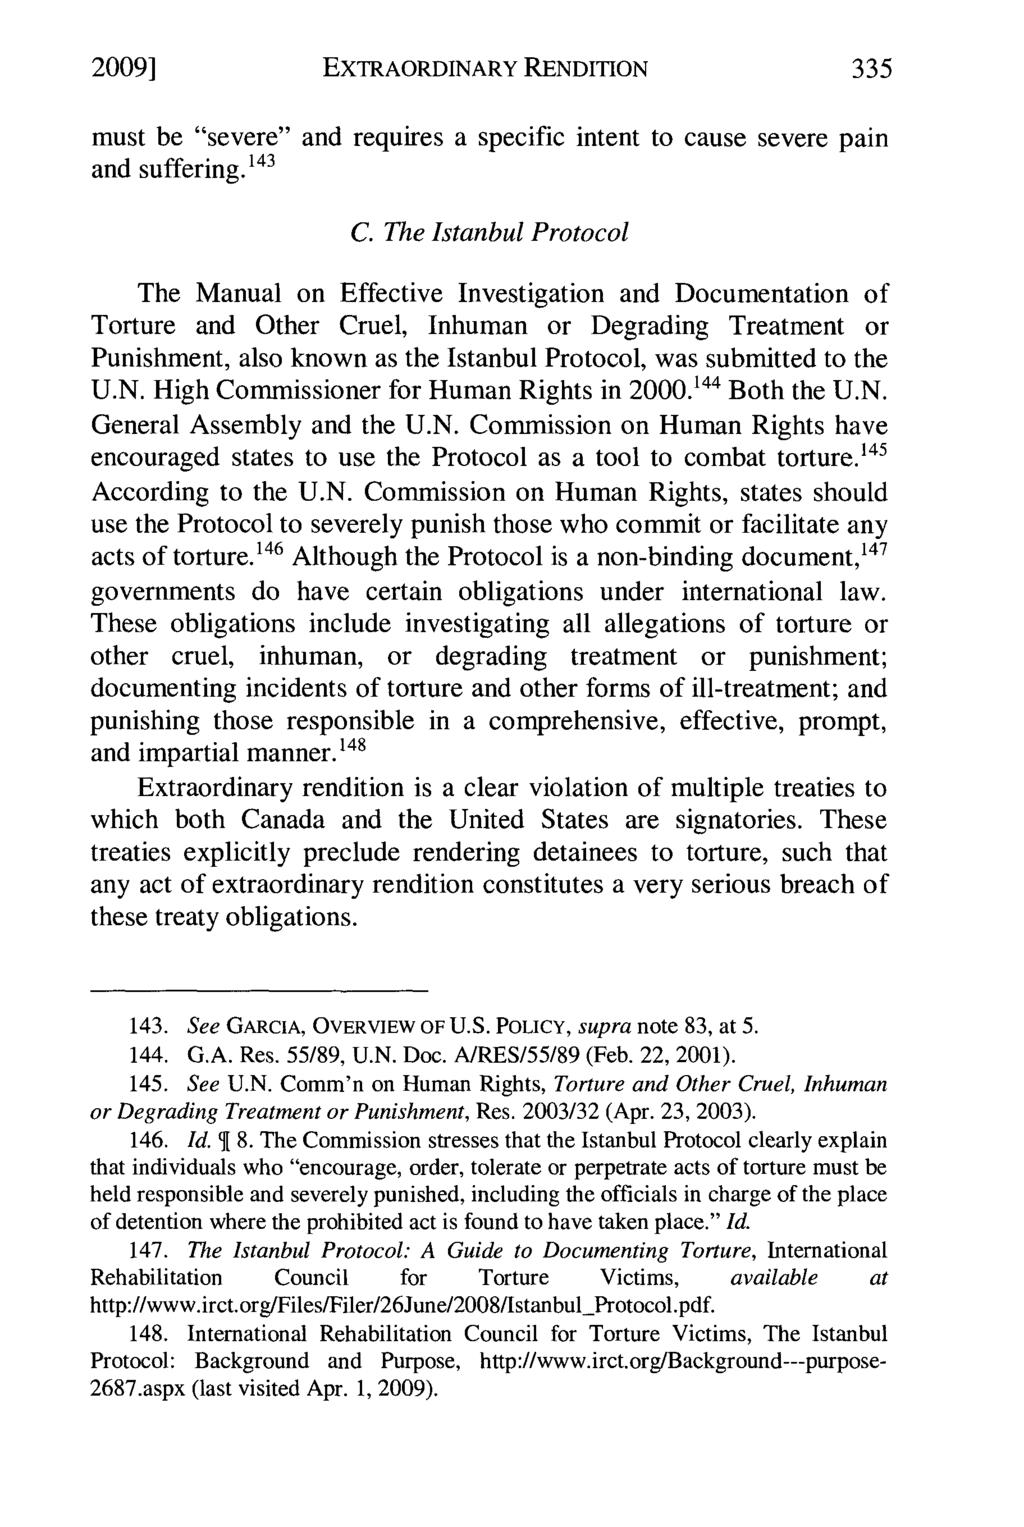 2009] Silva: Extraordinary Rendition: A Challenge to Canadian and United State EXTRAORDINARY RENDITION 335 must be "severe" and requires a specific intent to cause severe pain and suffering.' 1 43 C.